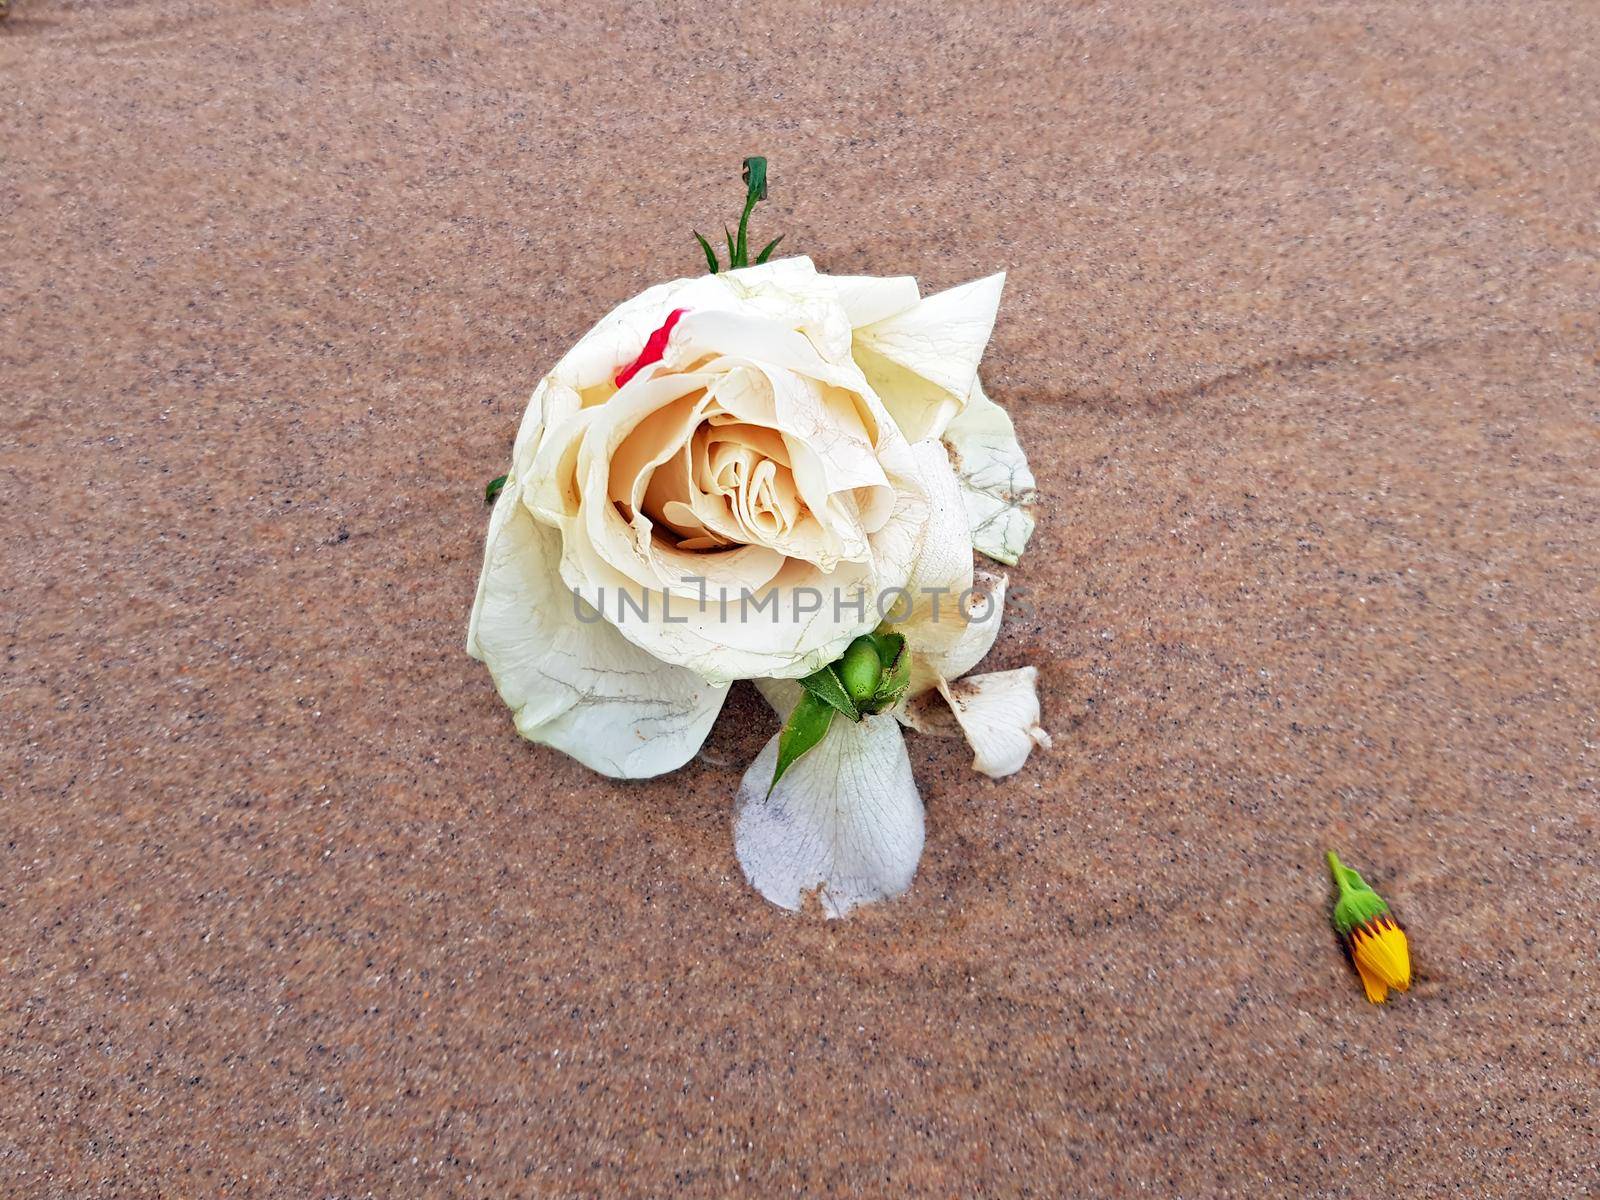 White rose at the beach near the ocean by devy